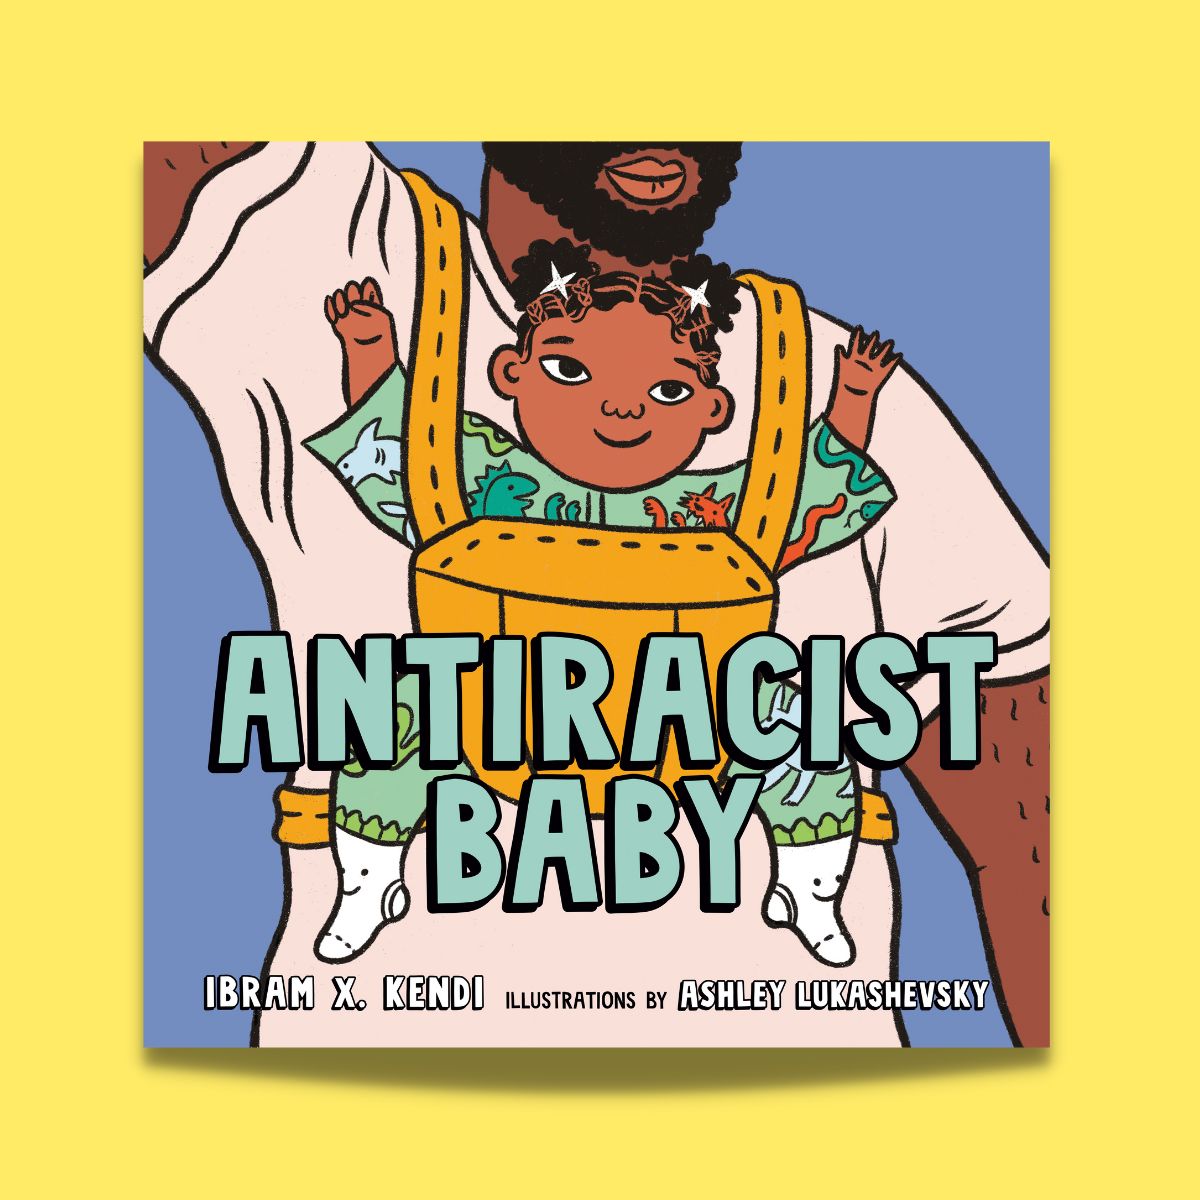 Books for Young Readers in Celebration of Black History Month